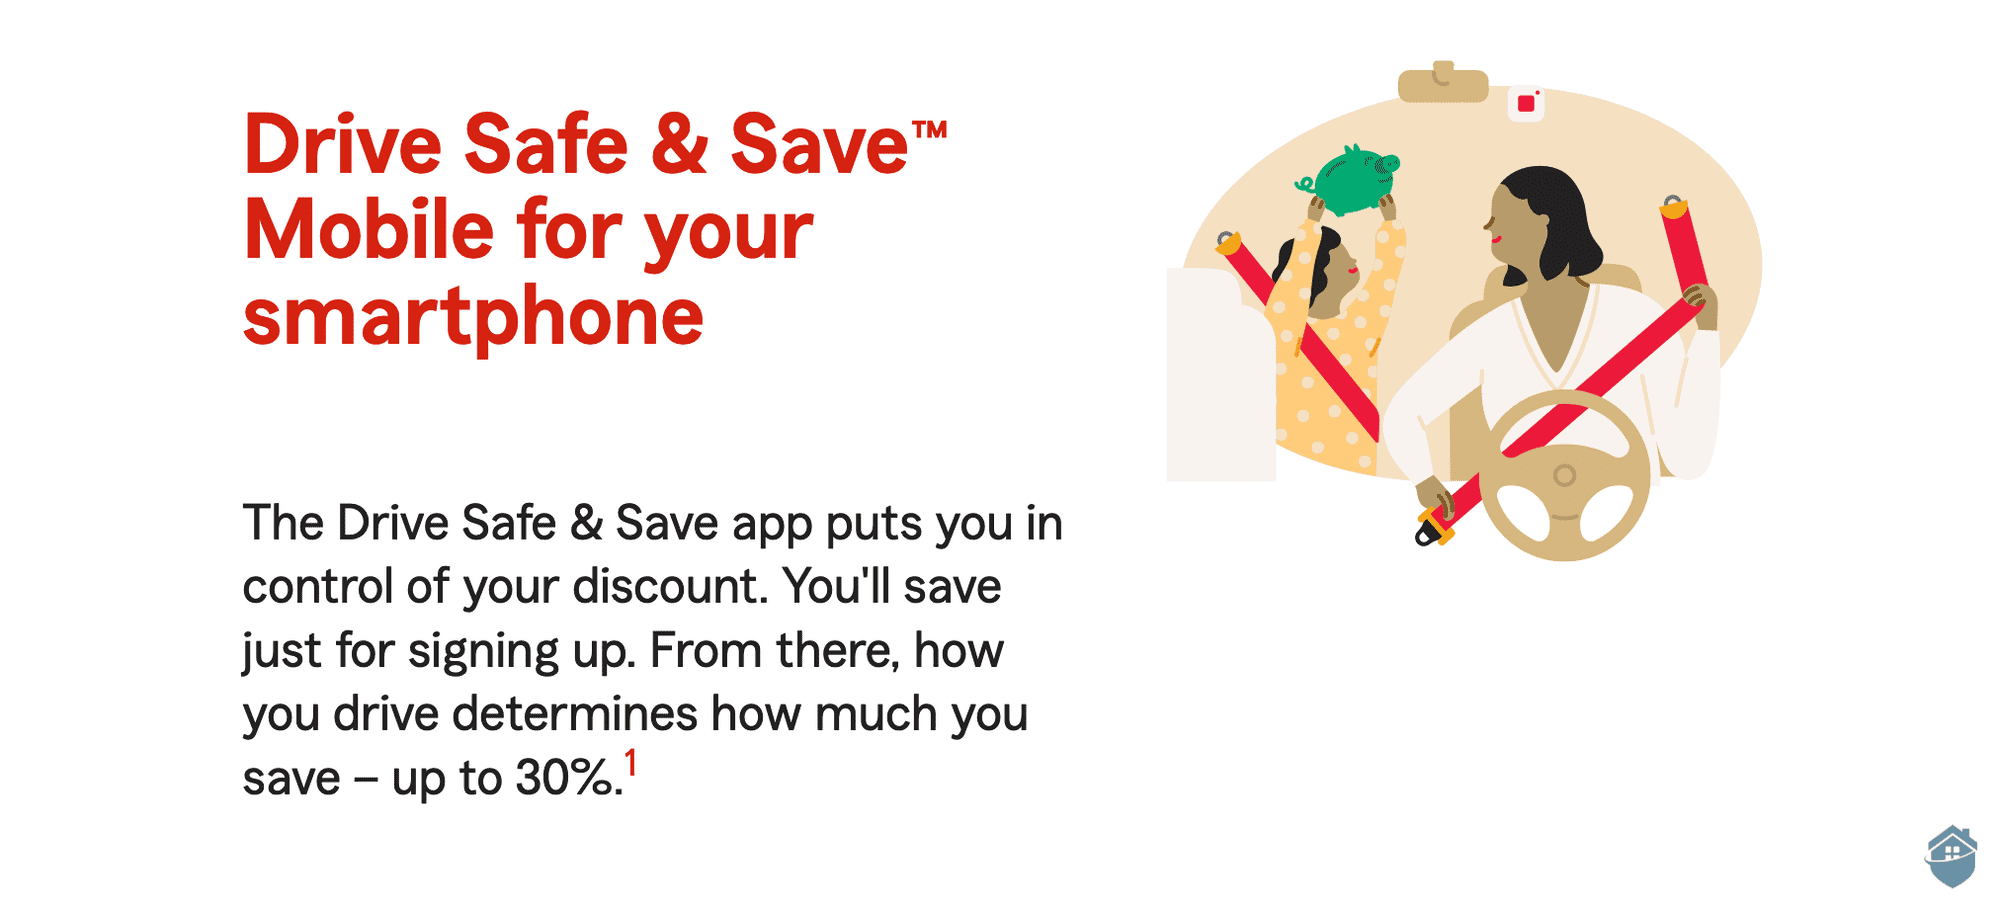 State Farm’s Drive Safe & Save™ program calculates my auto premium based on my actual driving behavior.